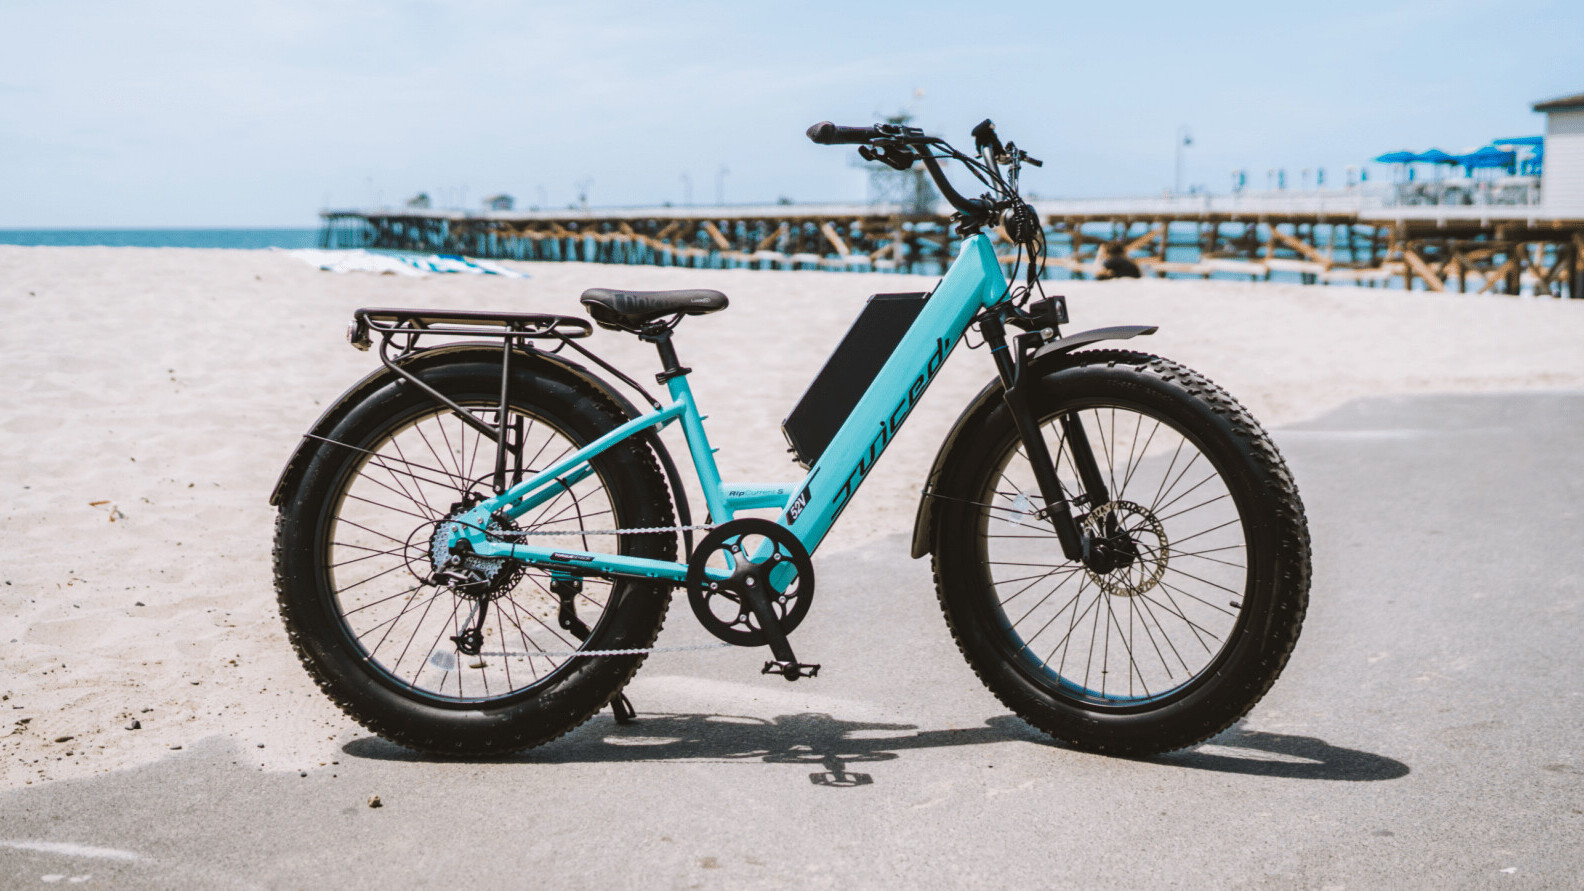 The Juiced RipCurrent Step-Through is a fat-tire 28mph ebike with tons of range